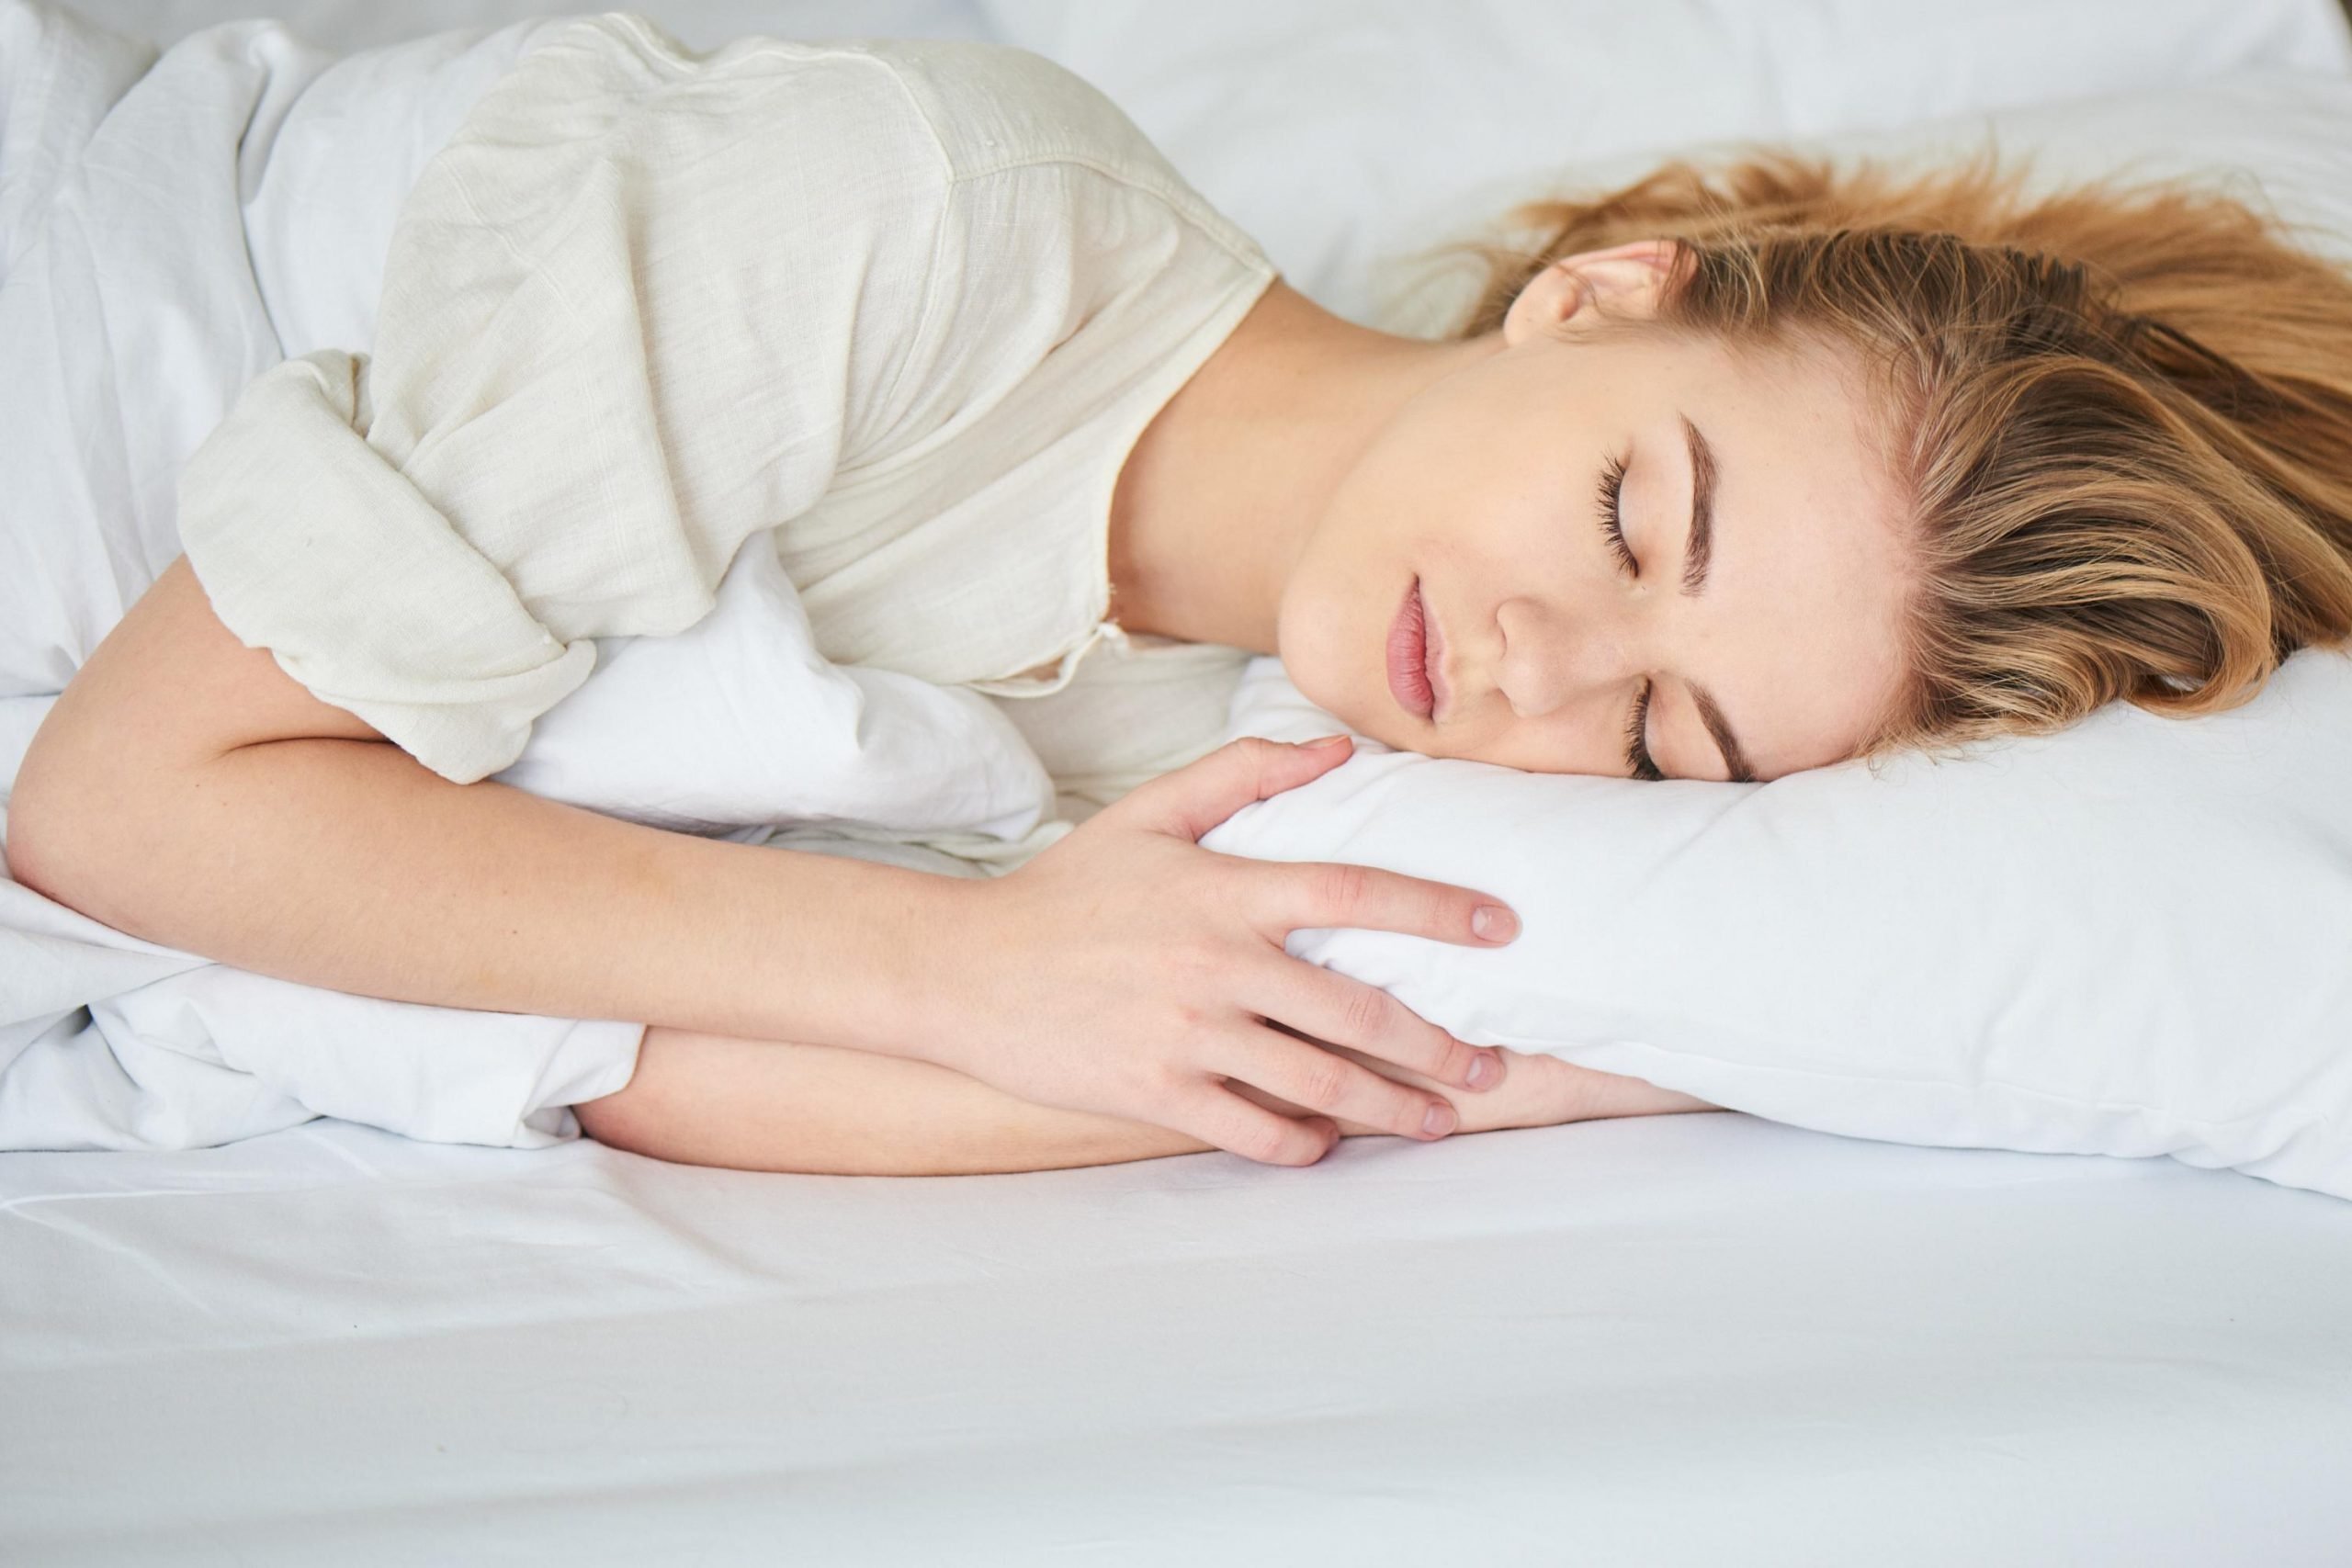 Sleeping Too Little or Too Much Could Raise Risk of ...